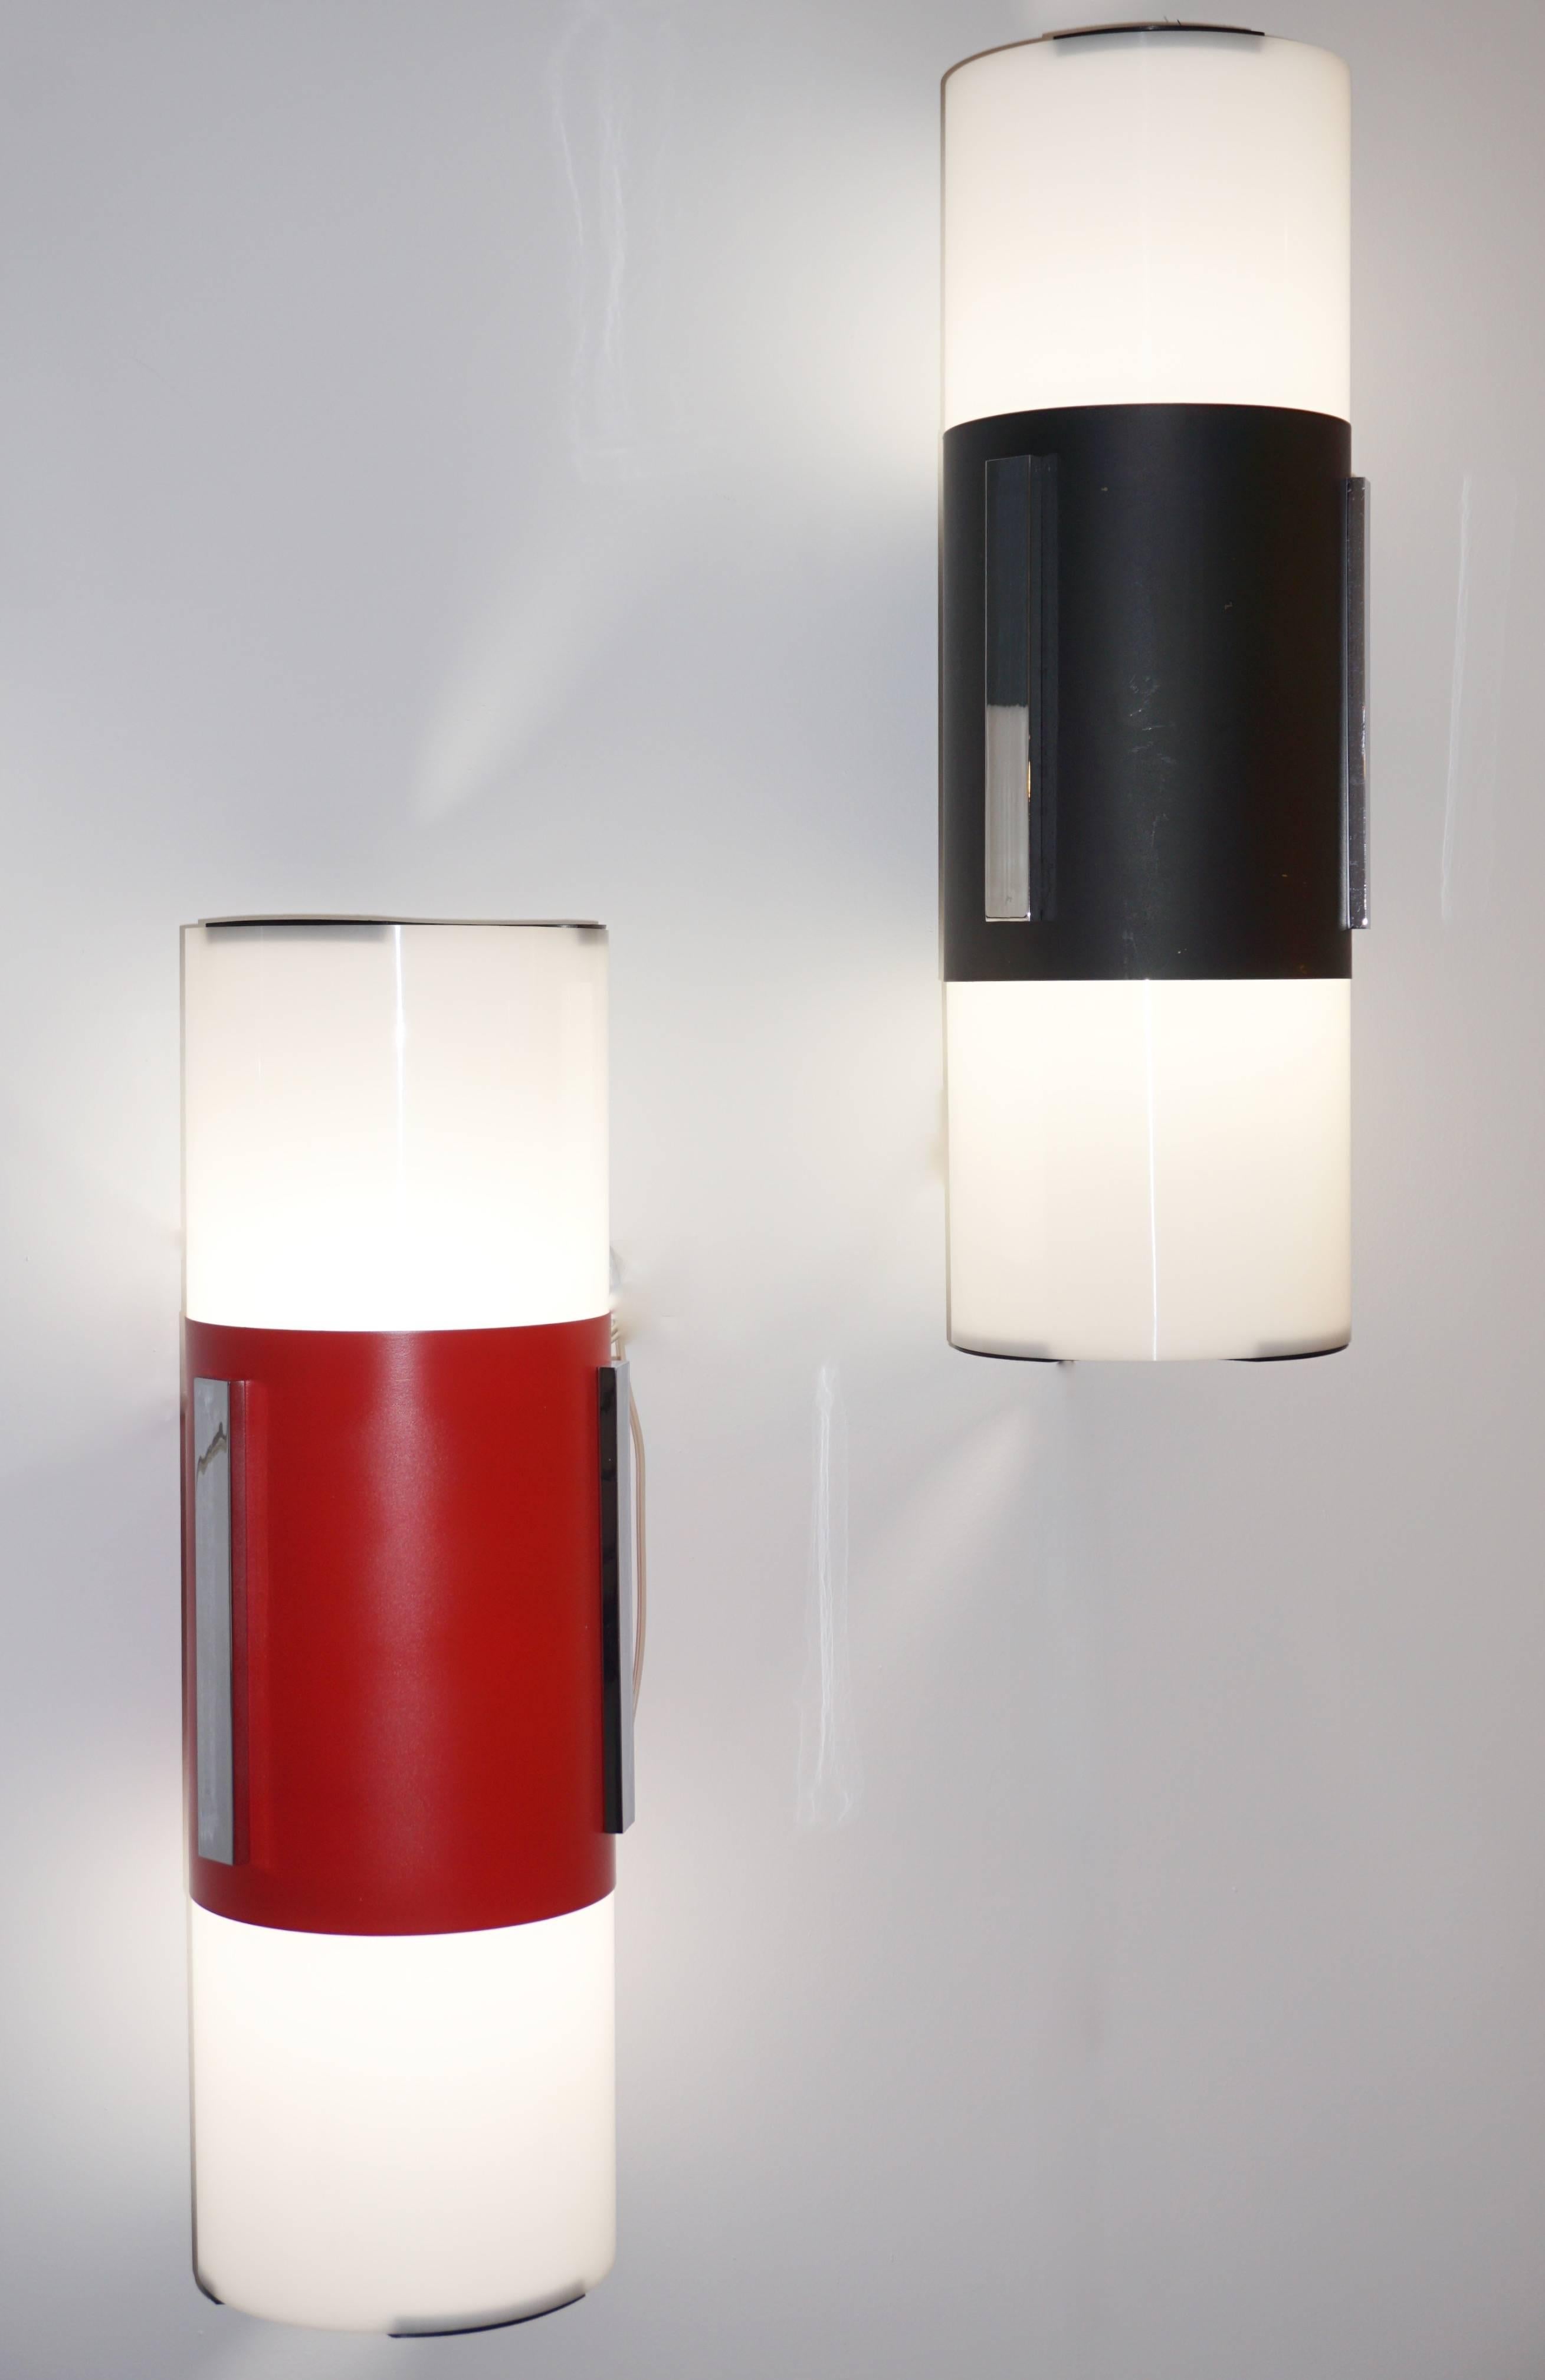 Four pairs in different colors available - 1960s Italian Mid-Century Modern pair of solid plexiglass sconces / flush mount lights with Minimalist Design by the company LOM that operated in Monza, near Milan and closed in 1990. The execution is of